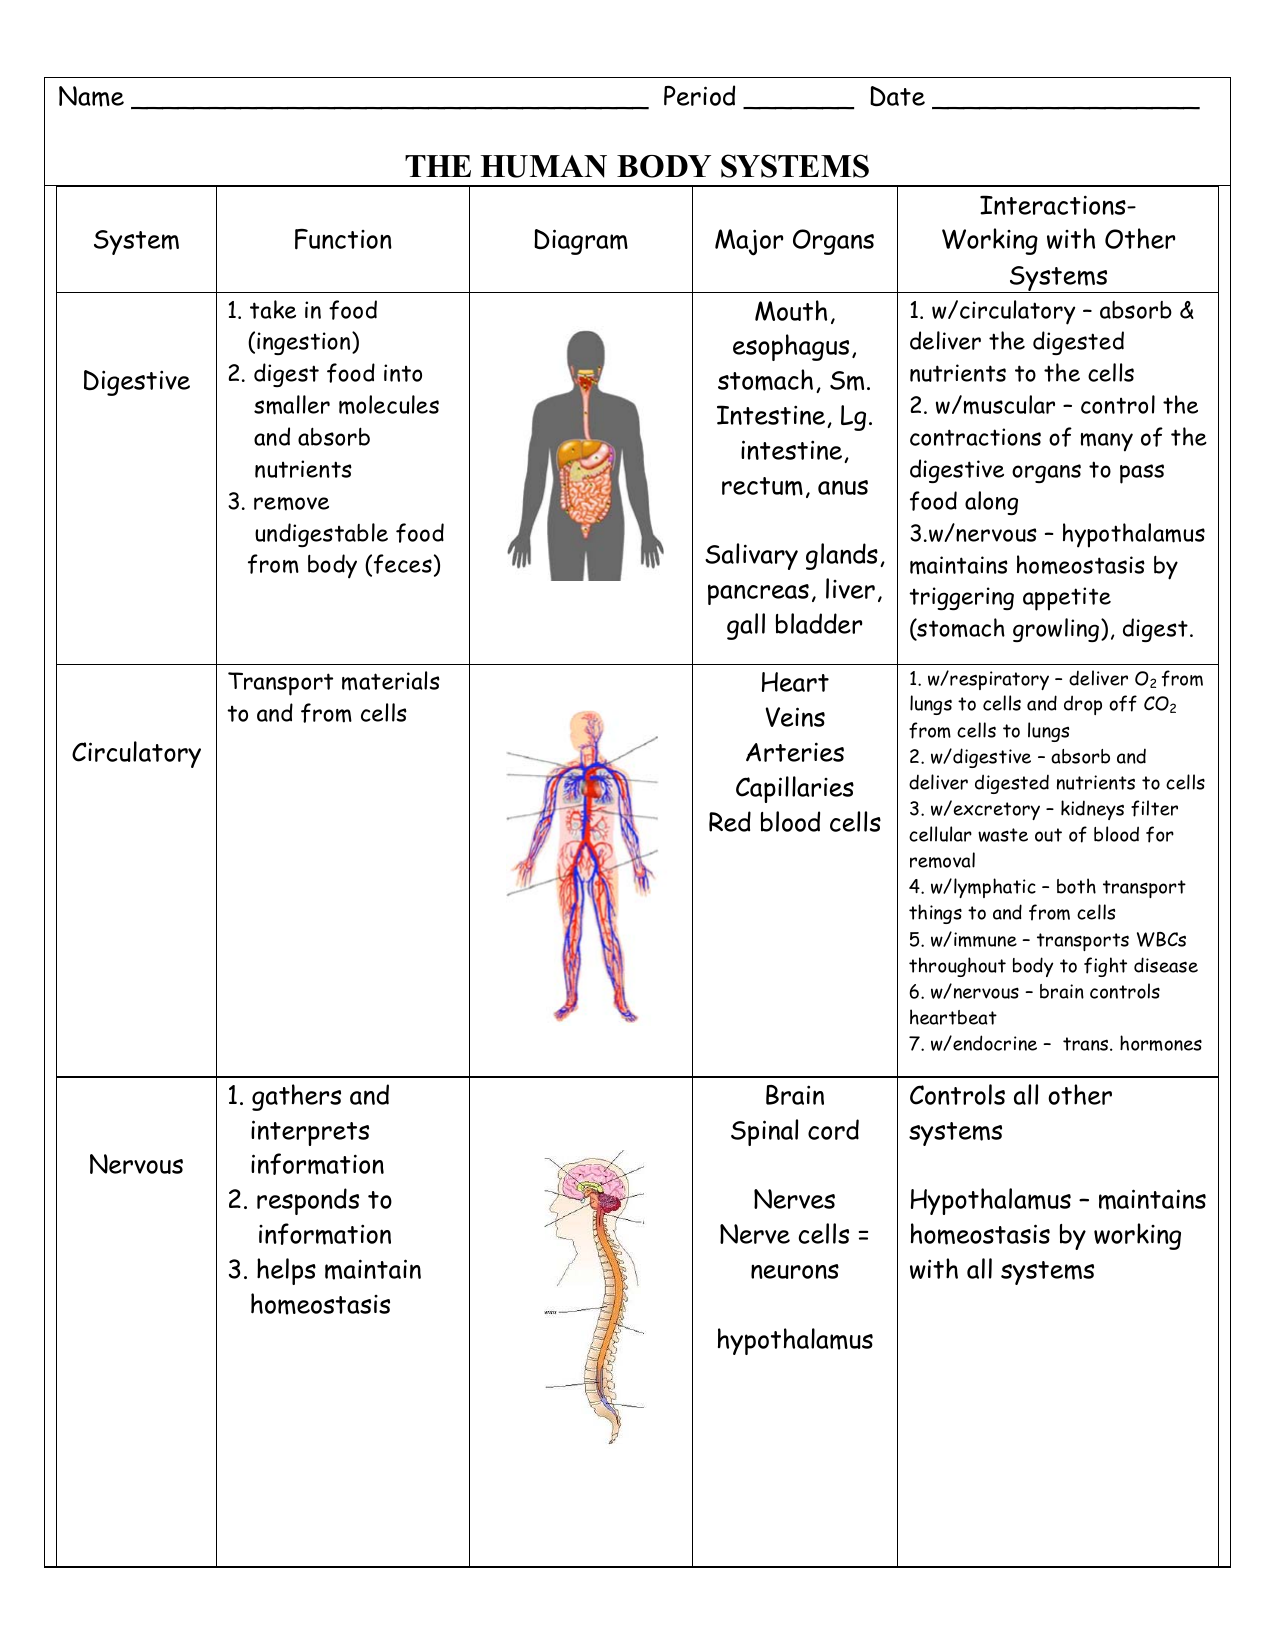 body-systems-interactions-chart